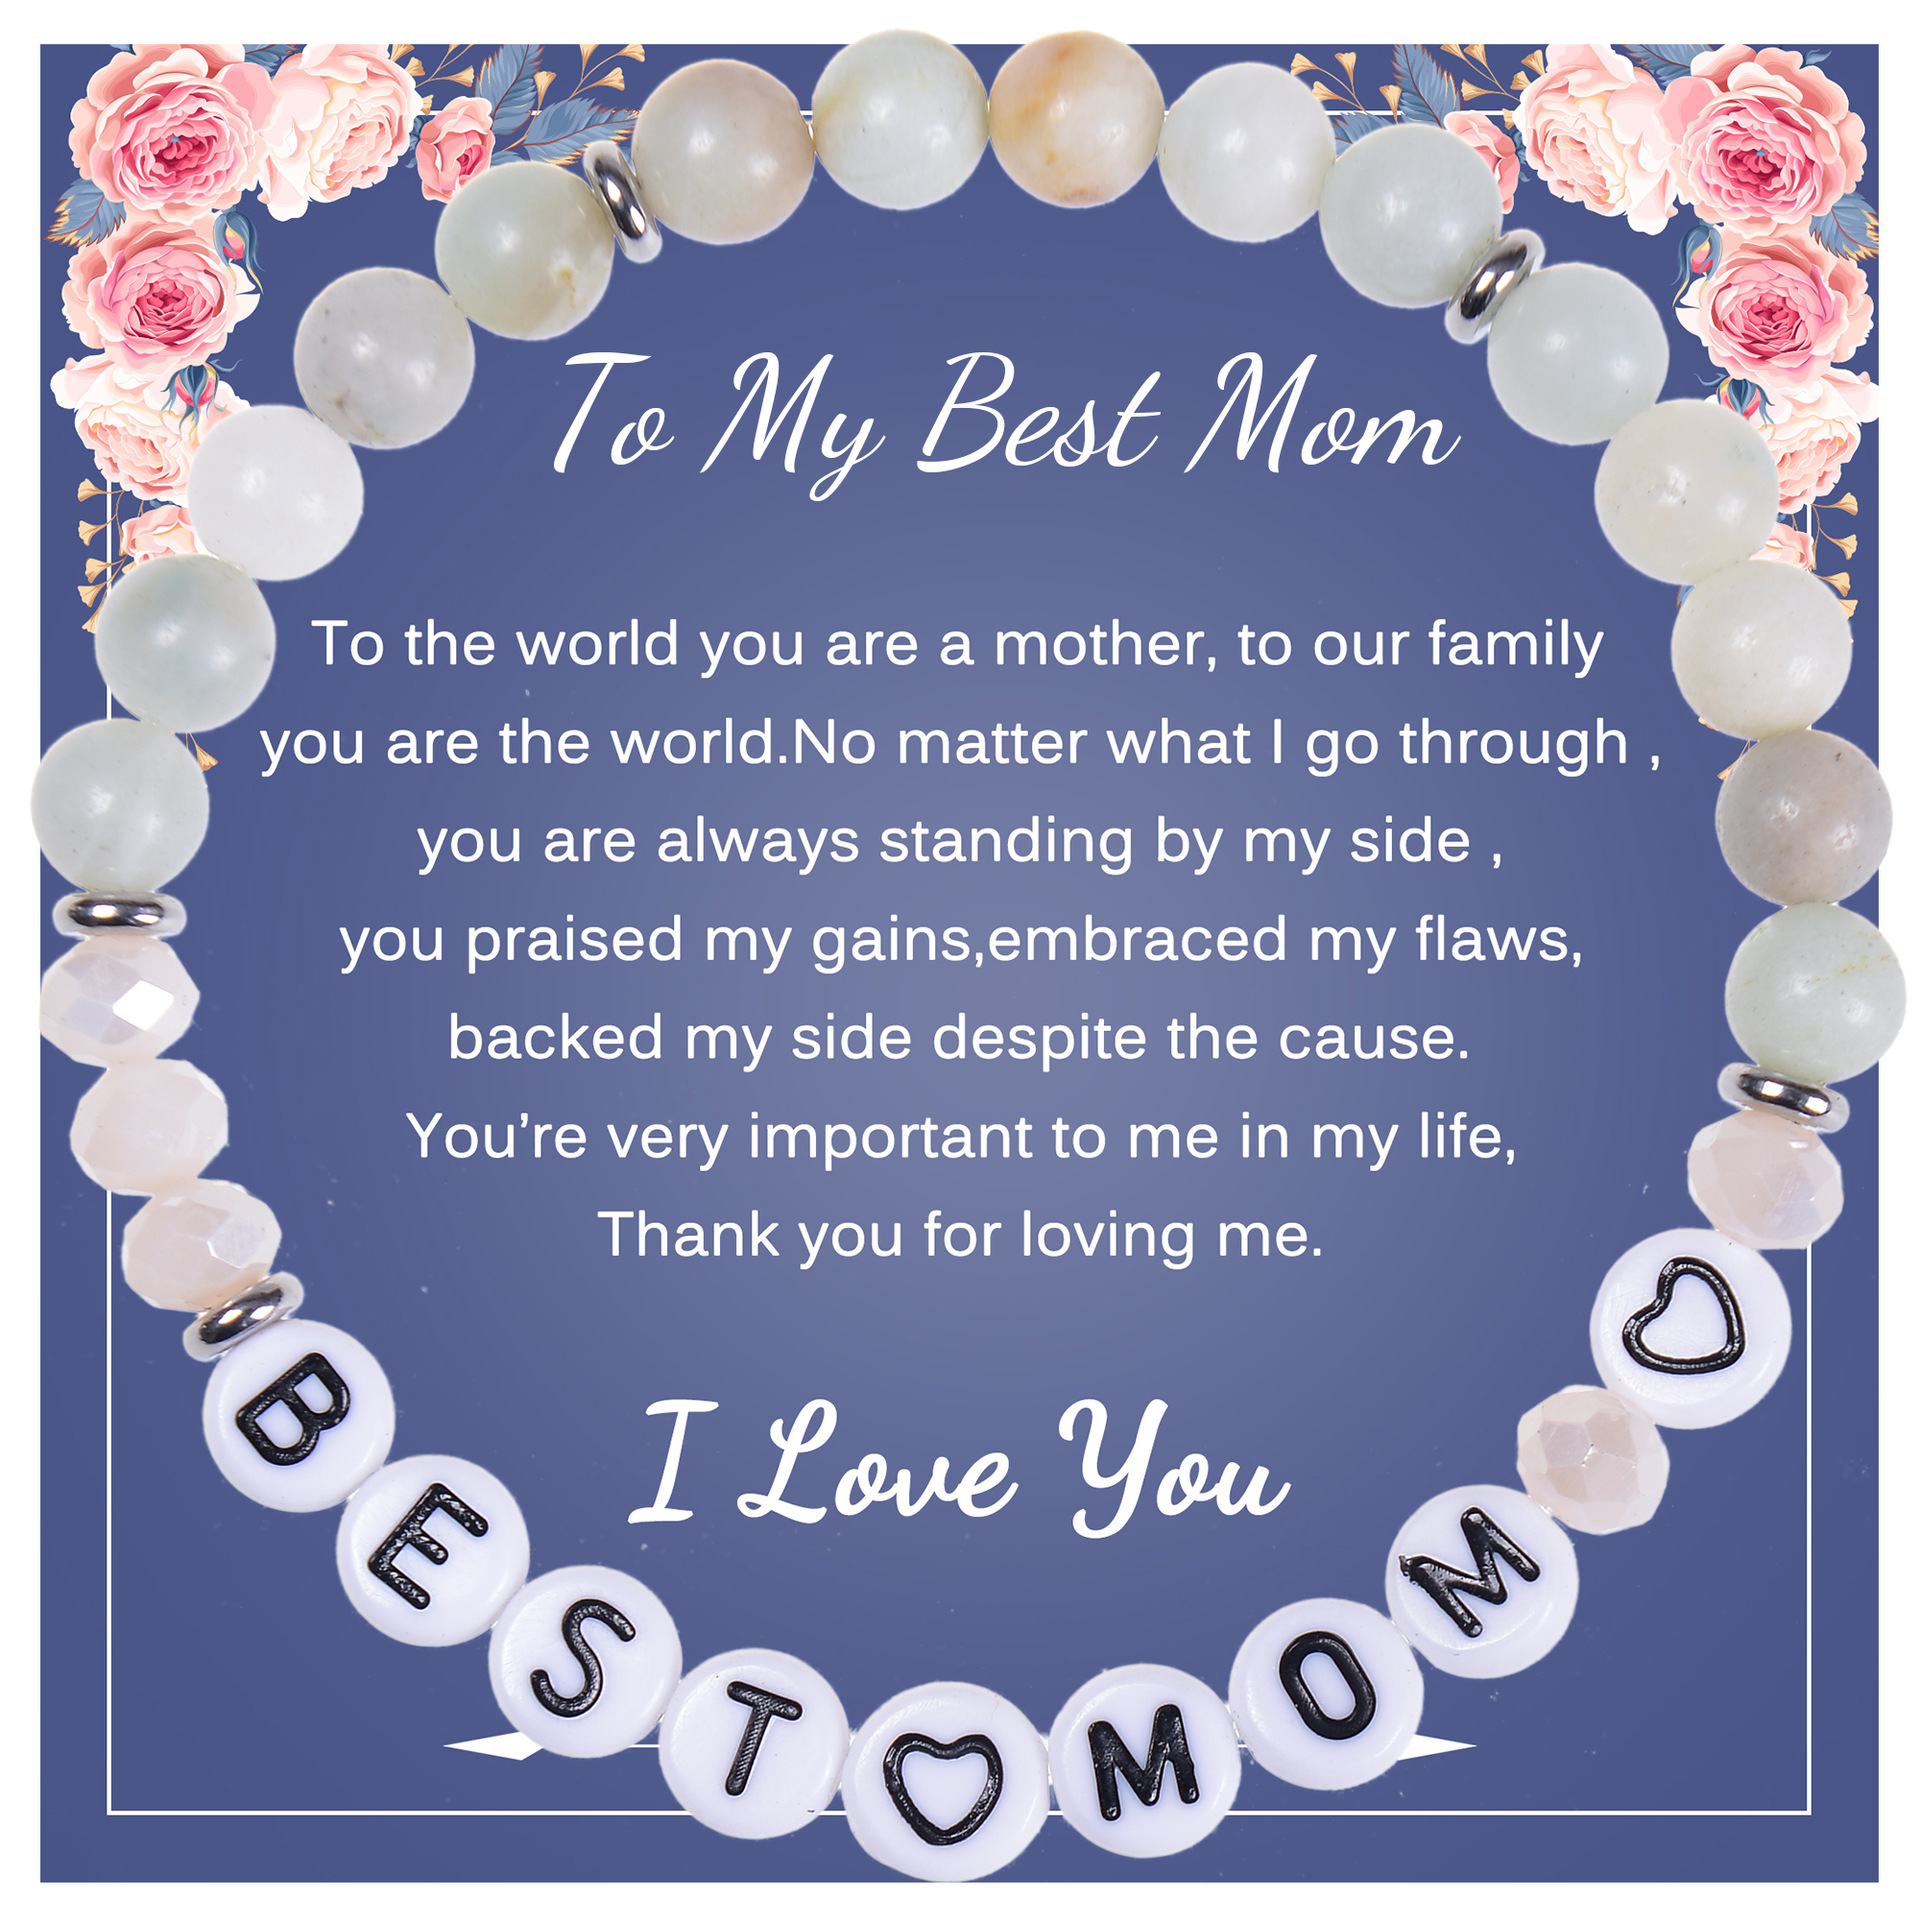 To My Best Mom